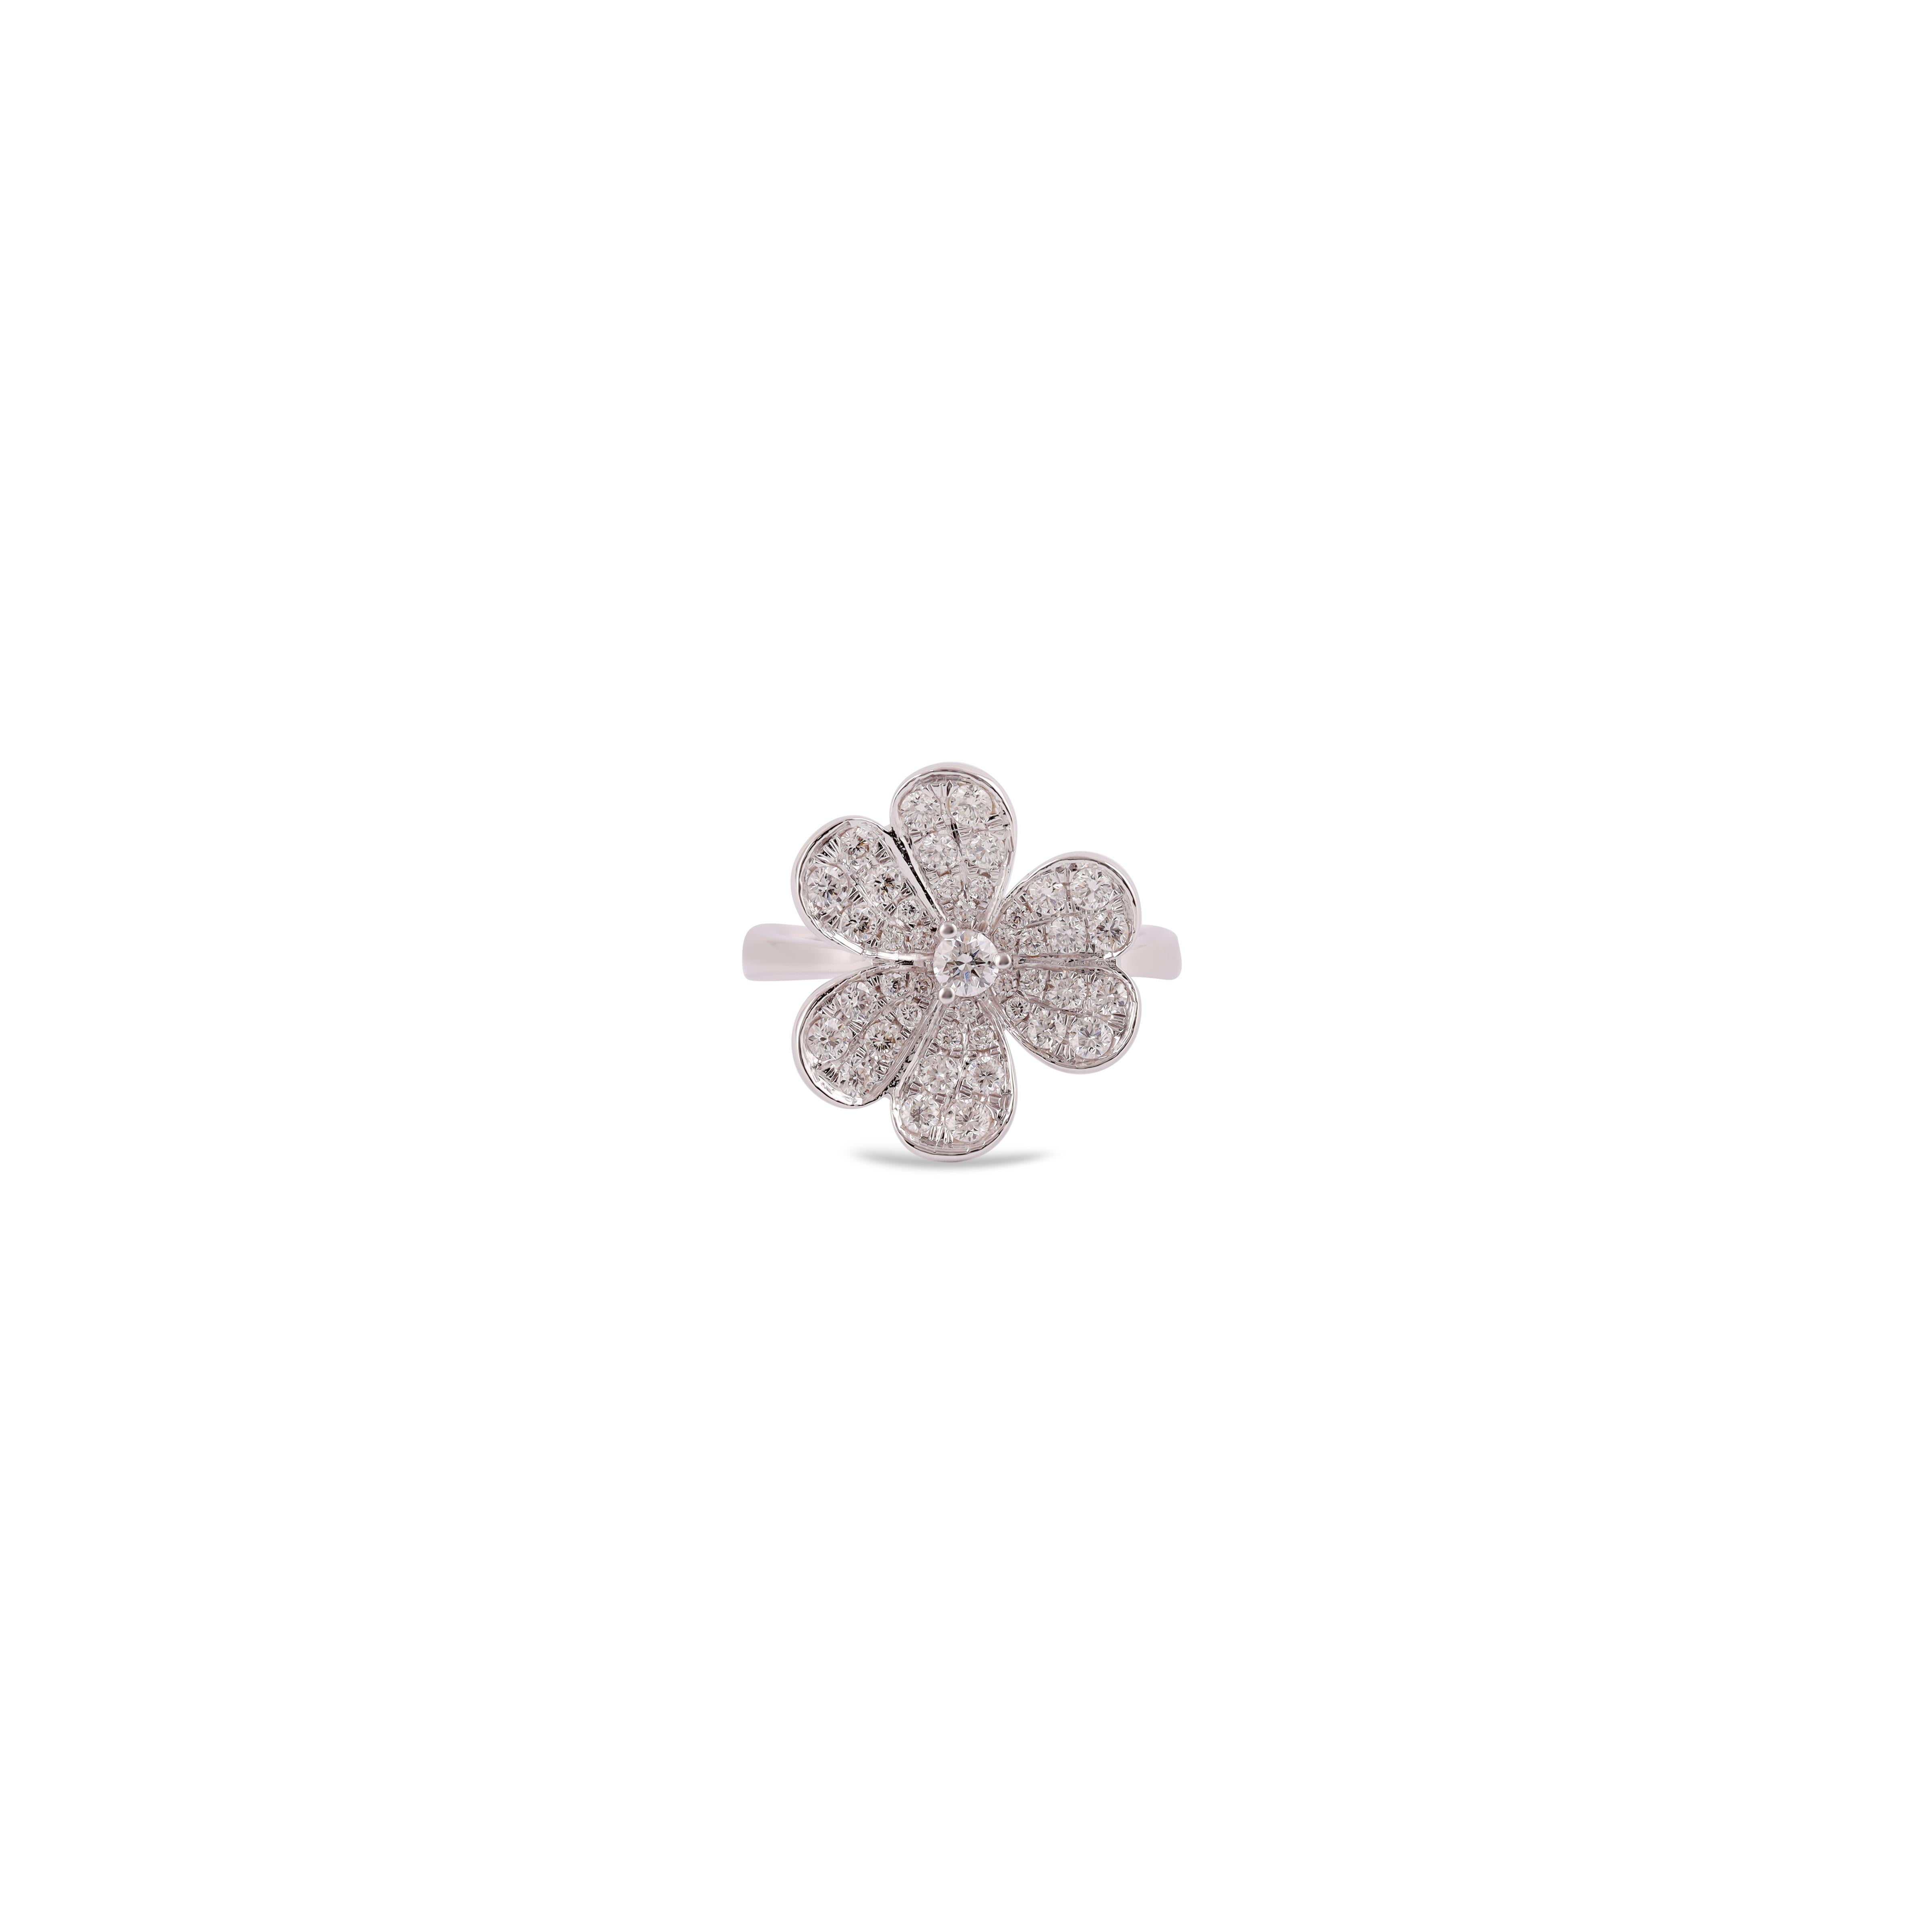 Its an elegant ring studded in 18k White gold with 6 Flower shaped Leaf in  diamond weight 0.76 carat, this entire ring studded in 18k White gold weight 4.48 grams, ring size can be change as per the requirement.